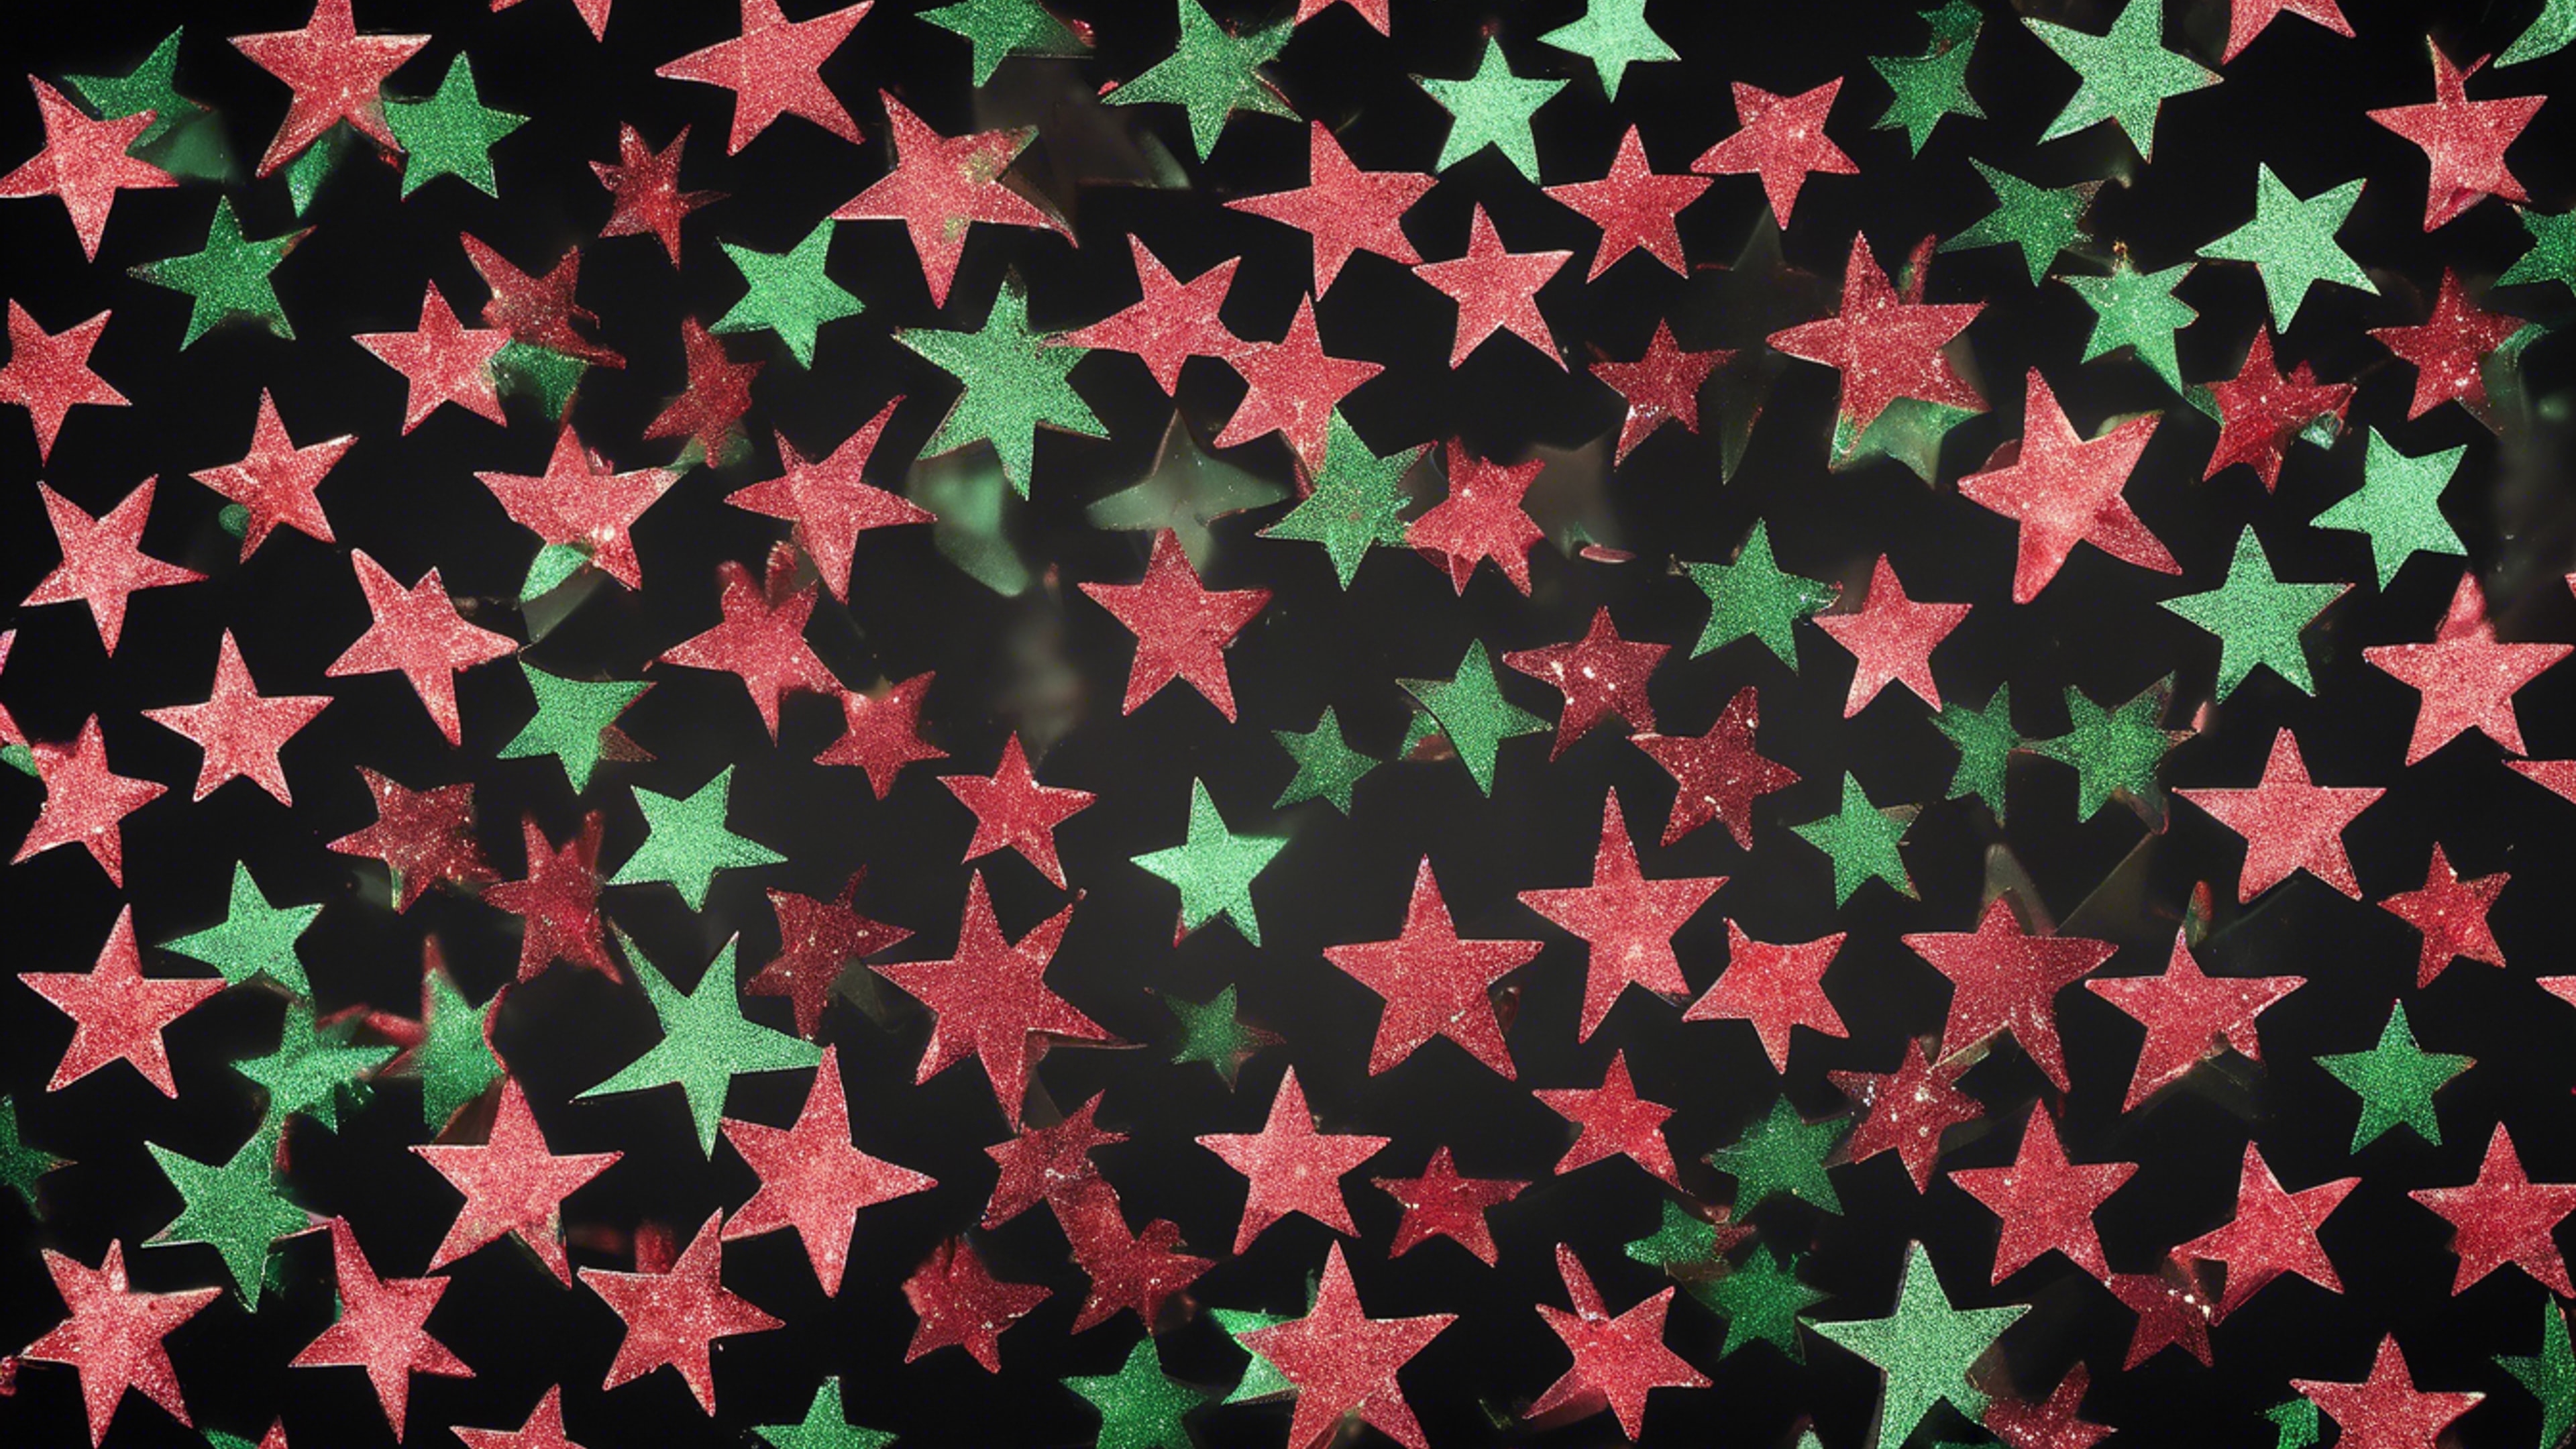 Green and red glitter forming star shapes on a black background Taustakuva[2fe752b5dc5f4f35ba35]